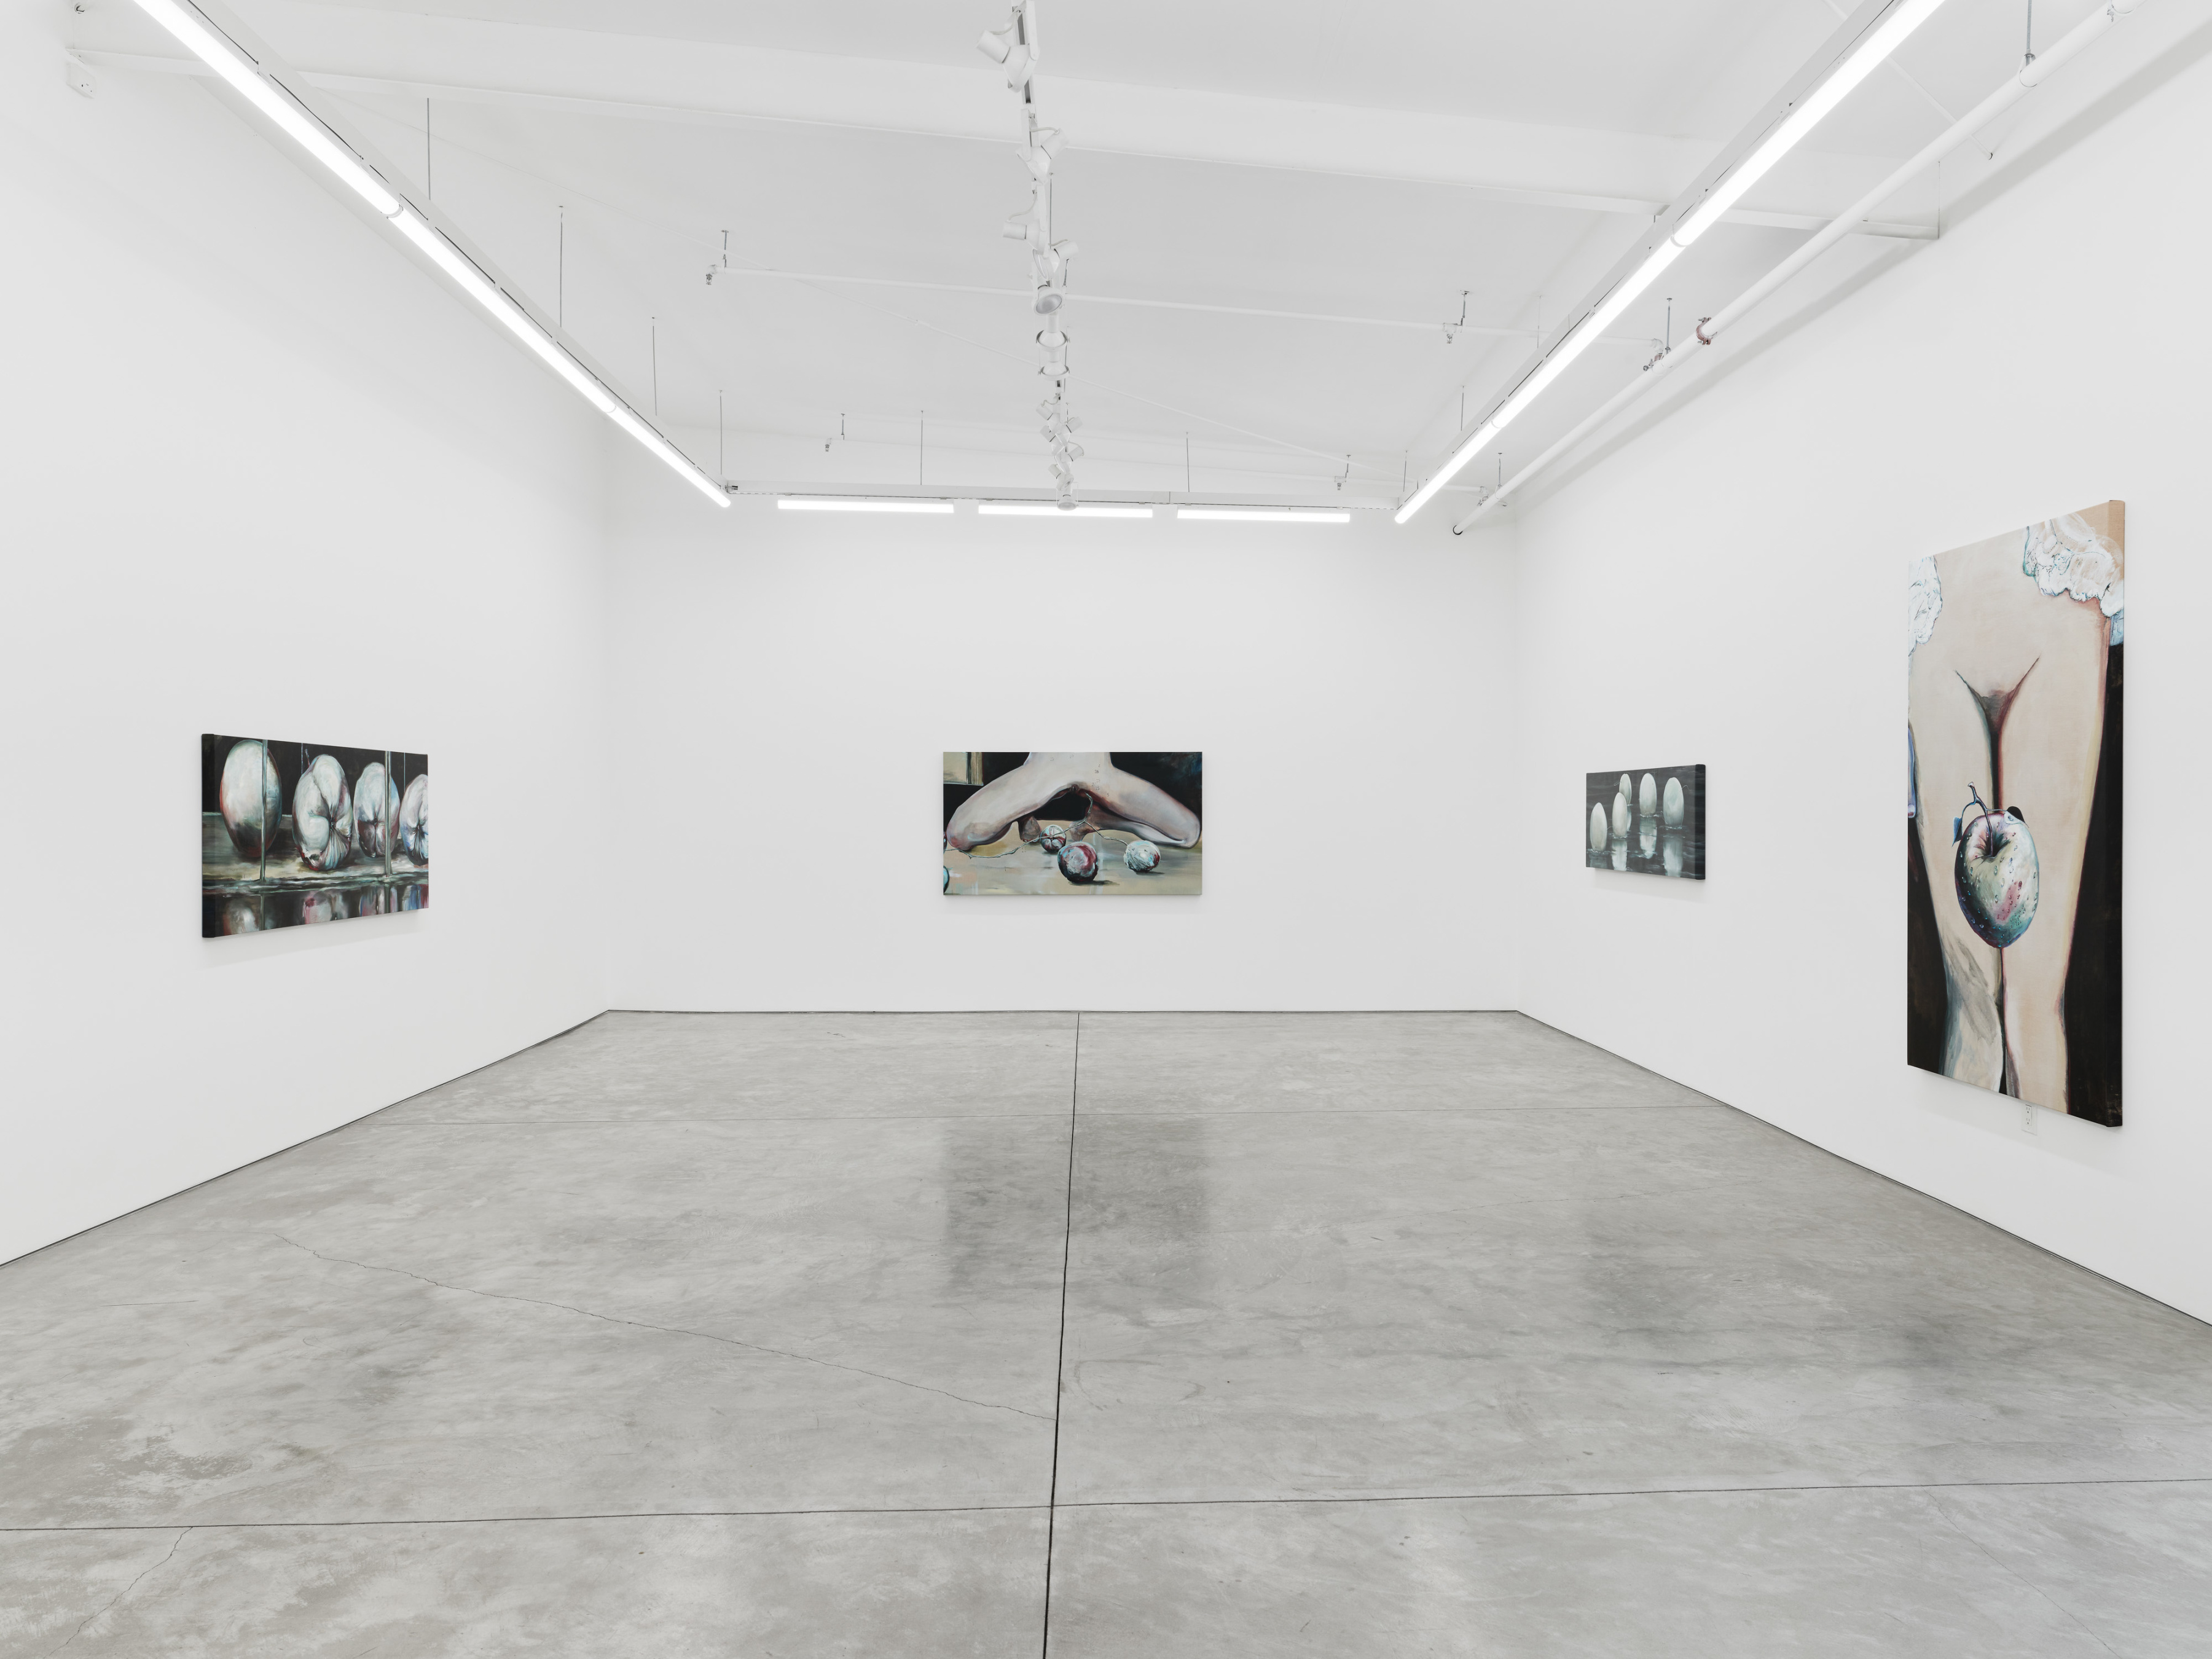 Installation view of Connor Marie Stankard’s exhibition “Love Apple” at Night Gallery